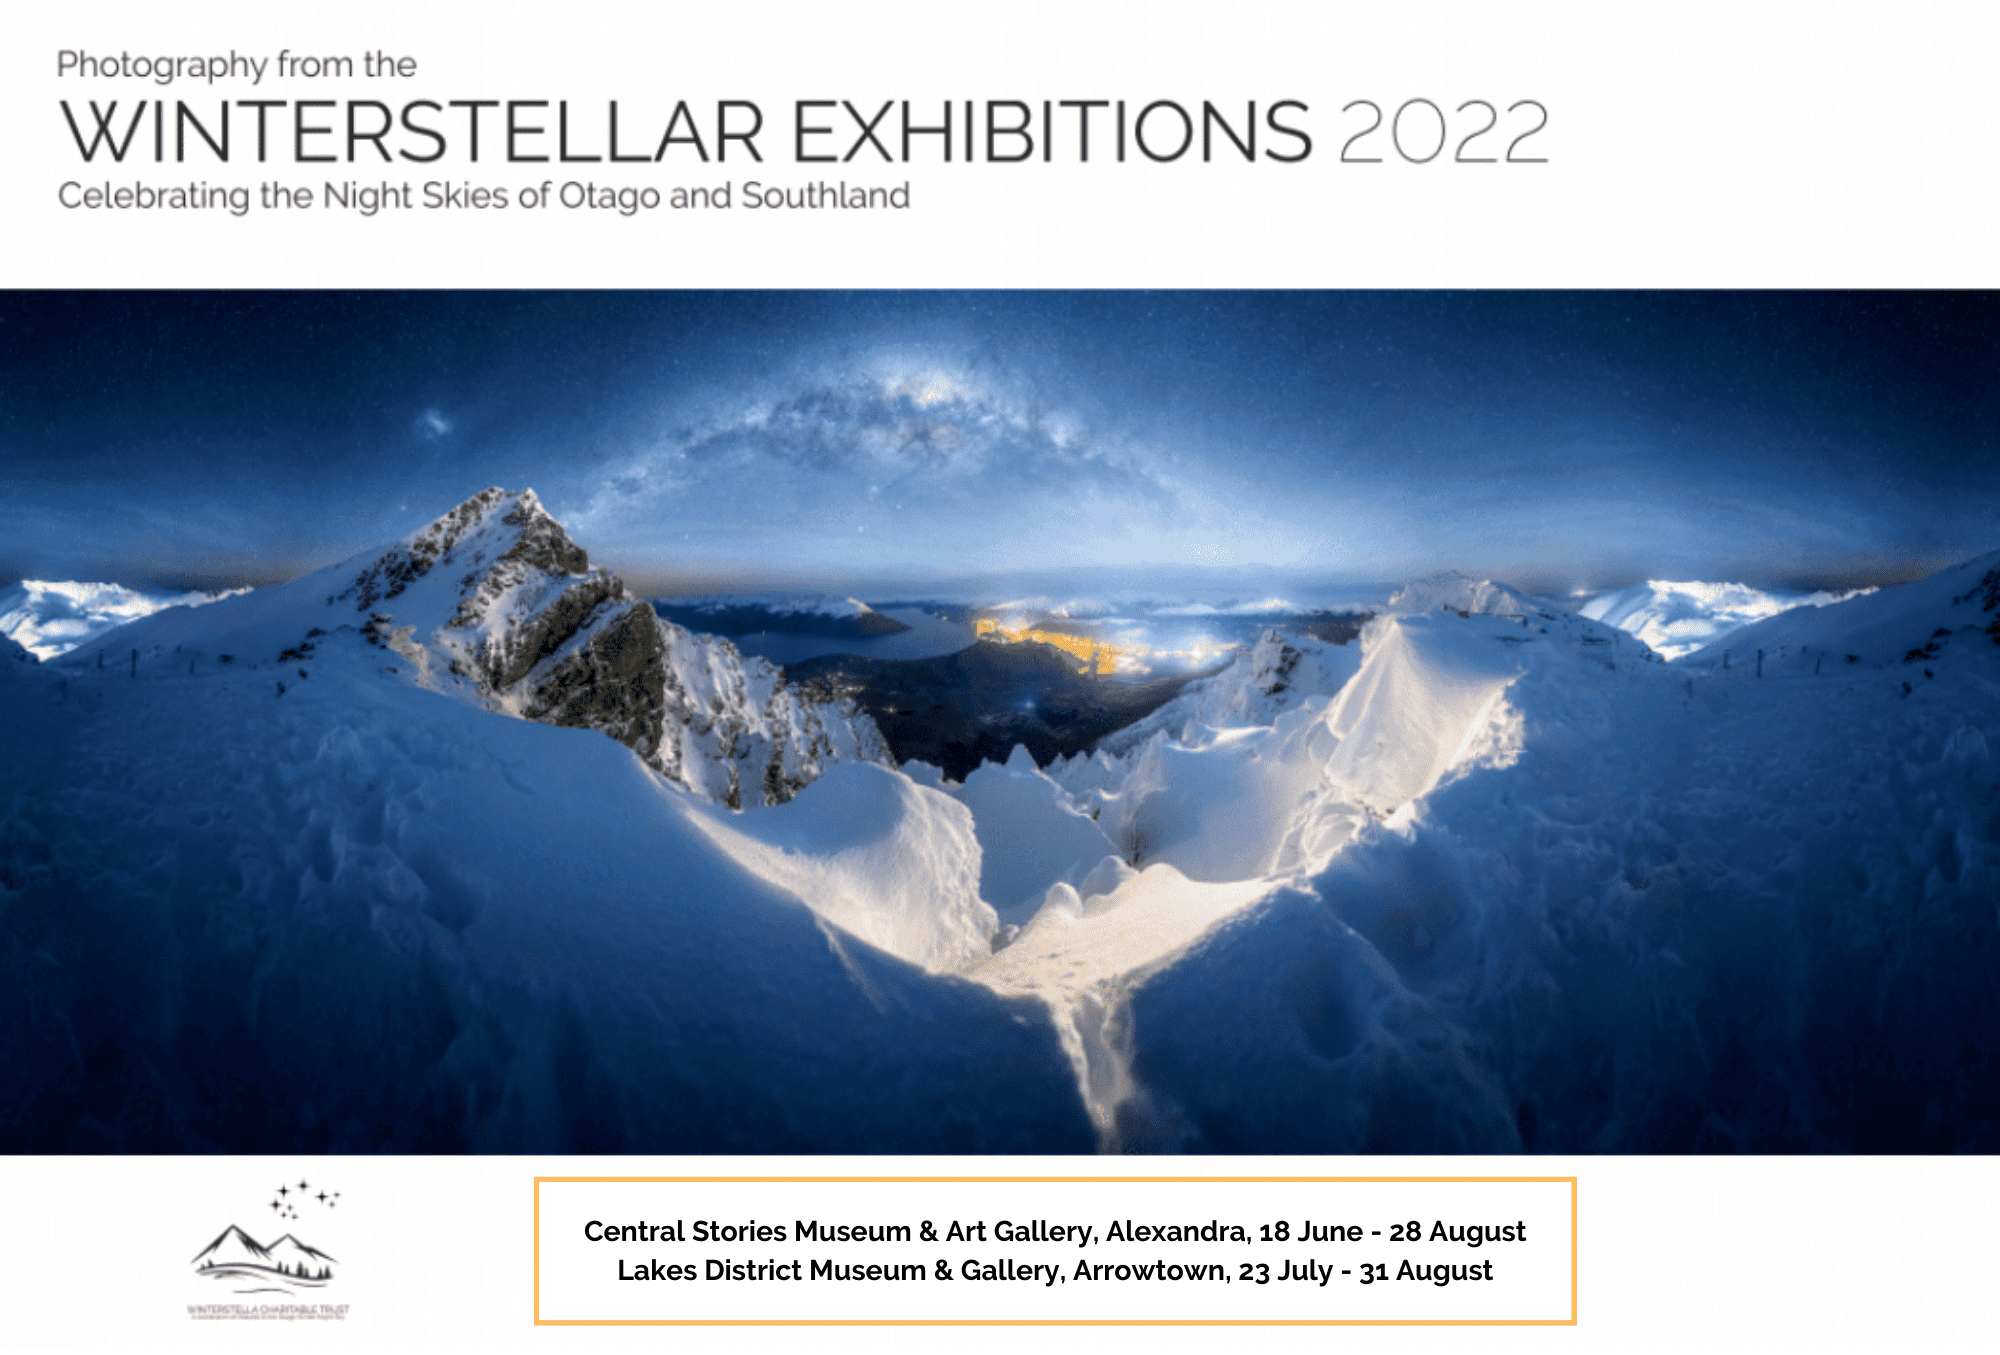 Winterstellar 2022 Book is now available